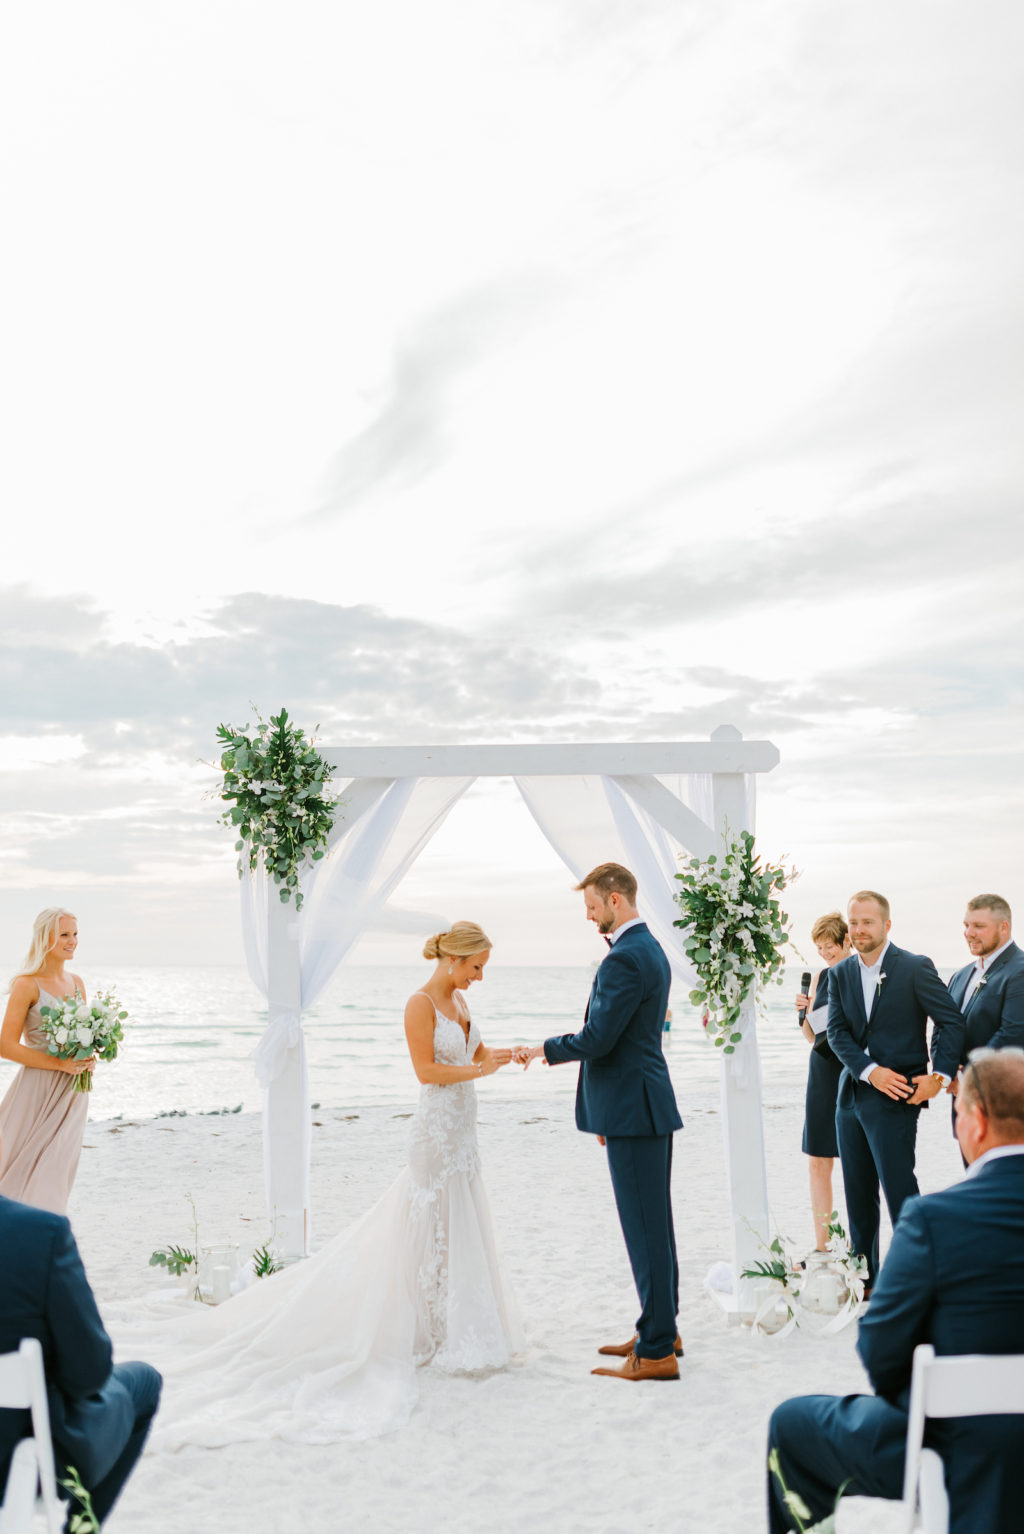 Florida Bride and Groom Exchanging Wedding Vows on Beach under White Arch with Greenery Arrangements and White Drapery | Tampa Wedding Venue The Resort at Longboat Key Club